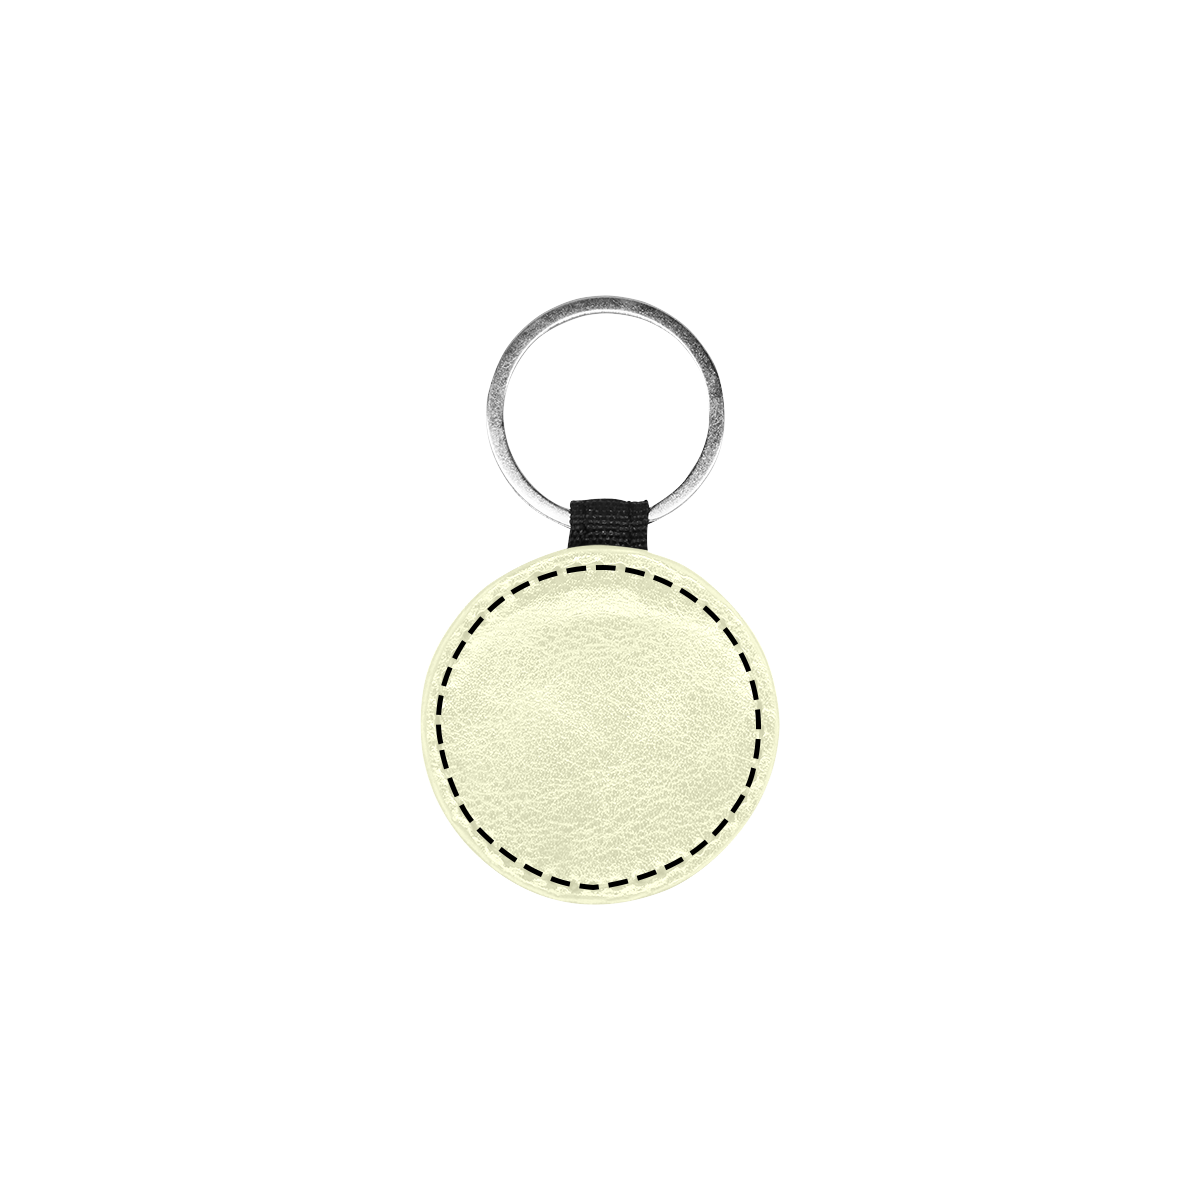 color light goldenrod yellow Round Pet ID Tag